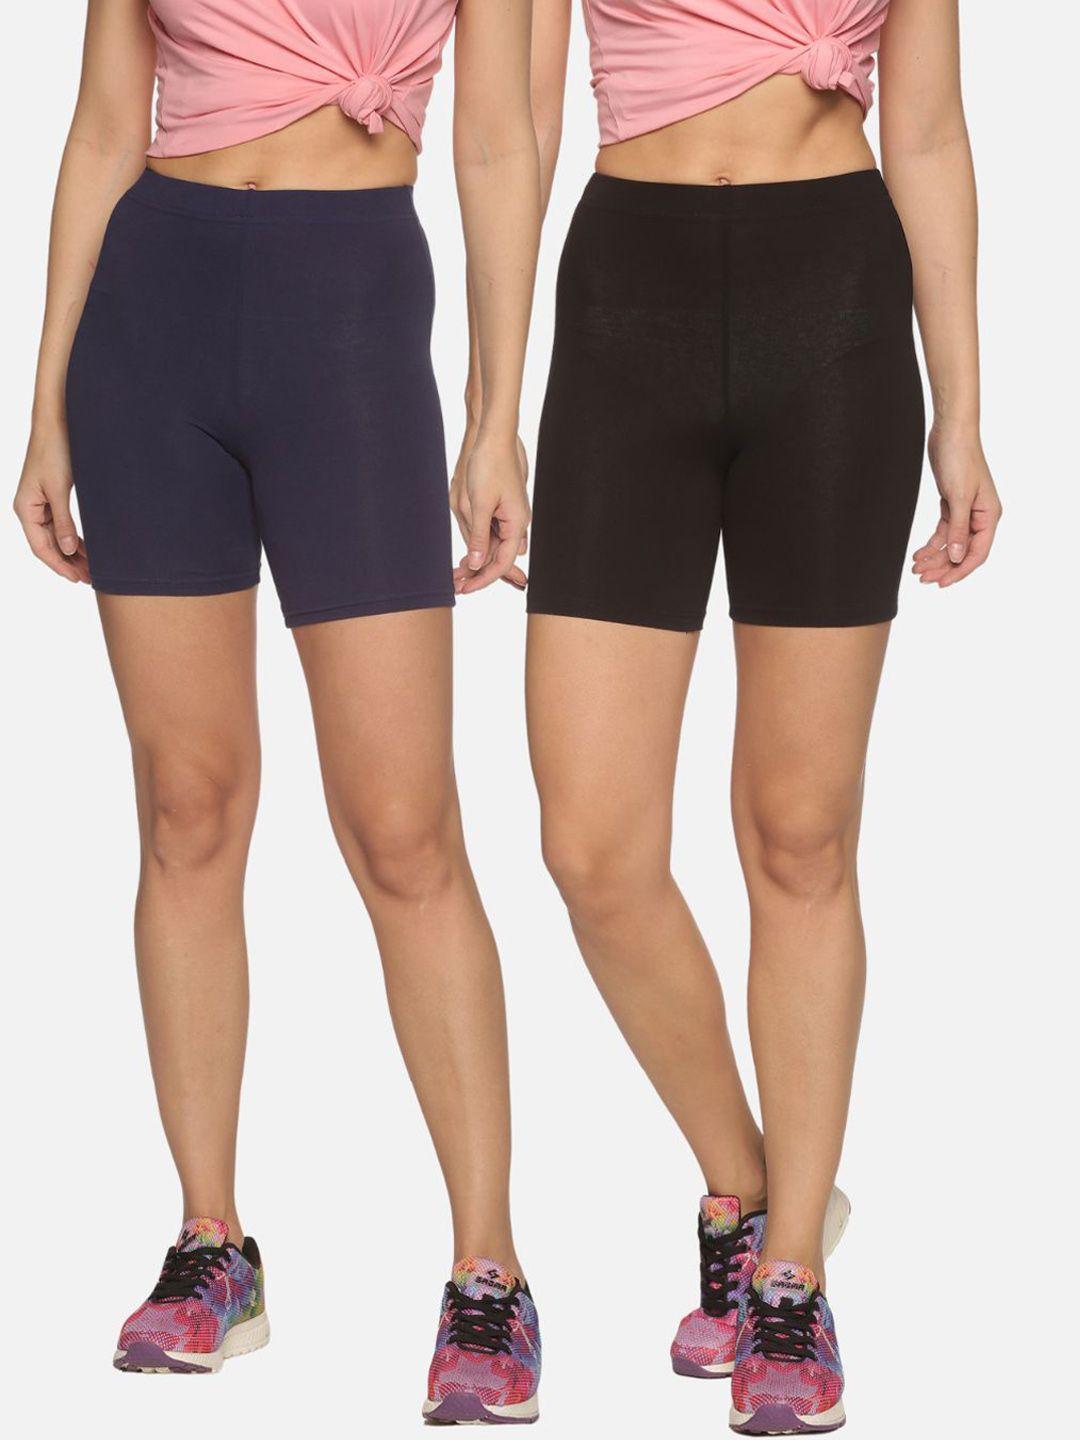 outflits women black skinny fit cycling sports shorts pack of 2